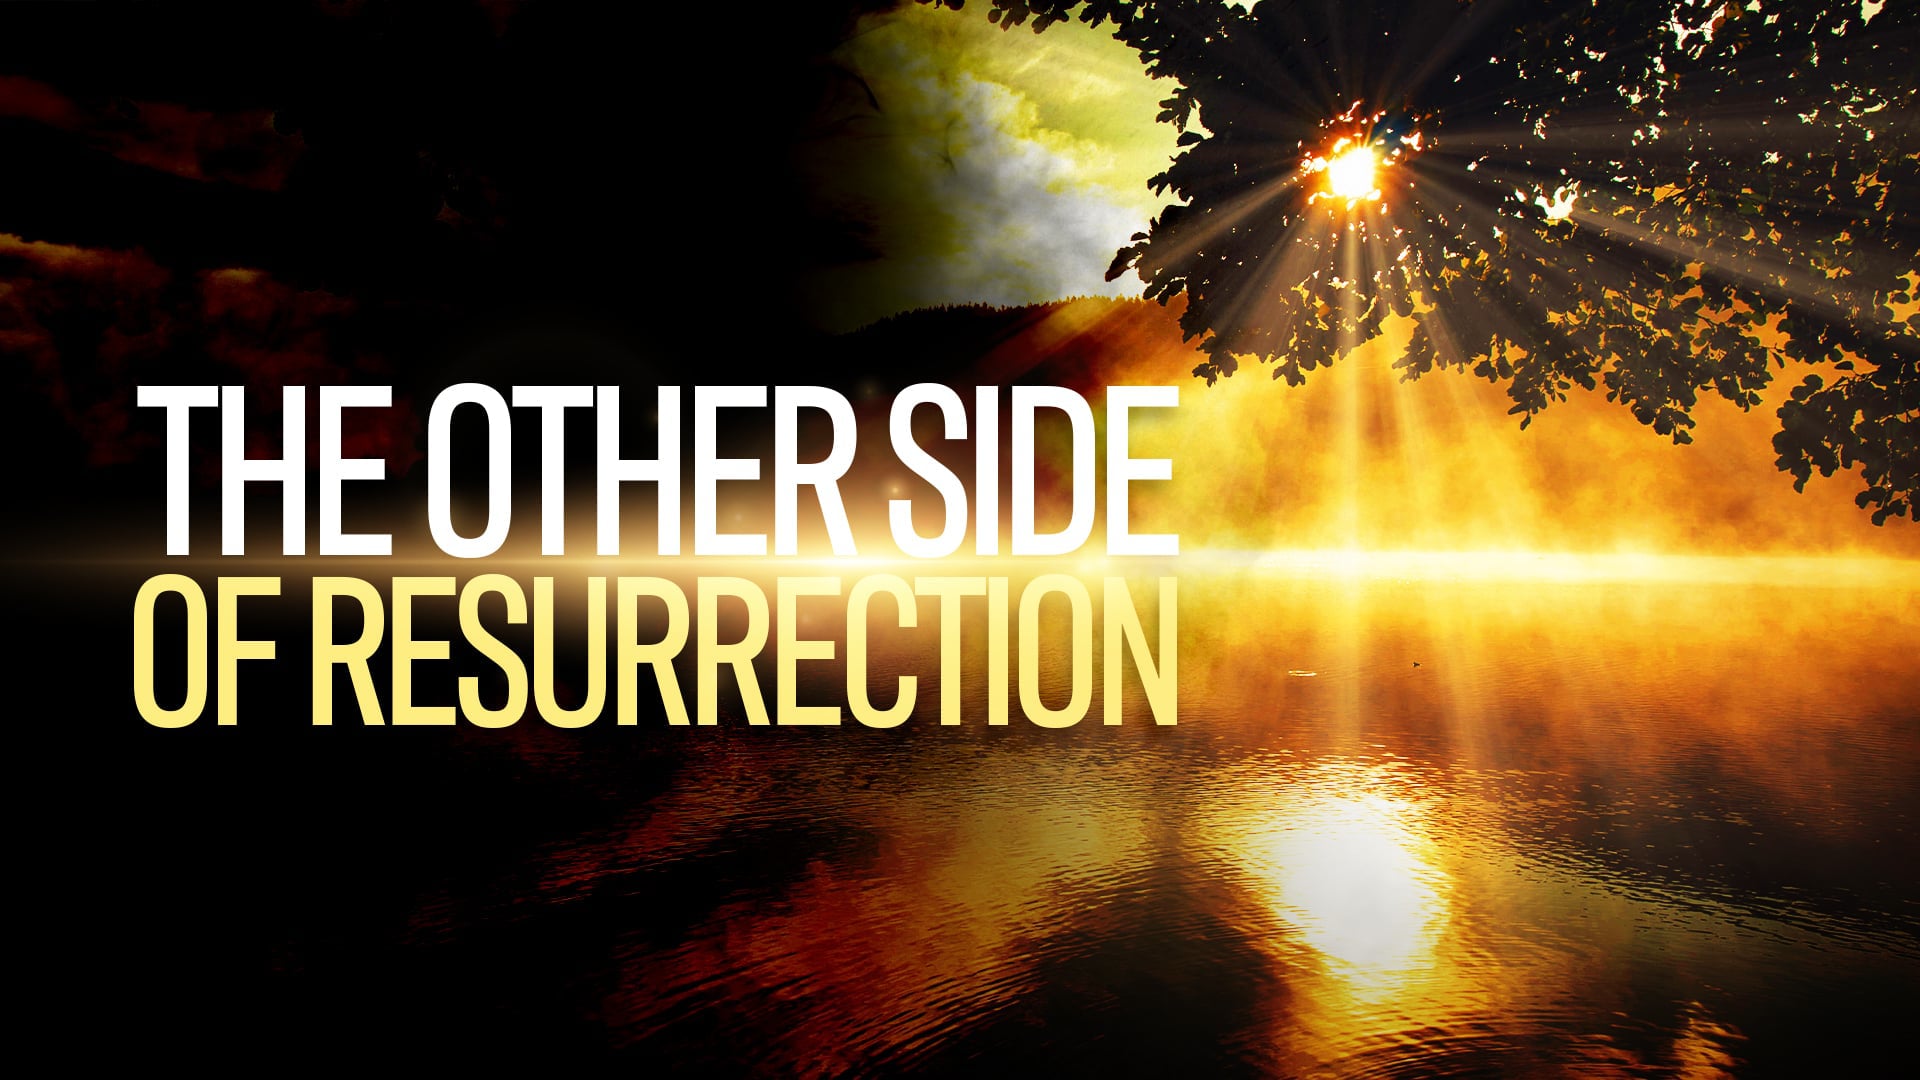 4/11/2021 | The Other Side of Resurrection | 11:00 AM